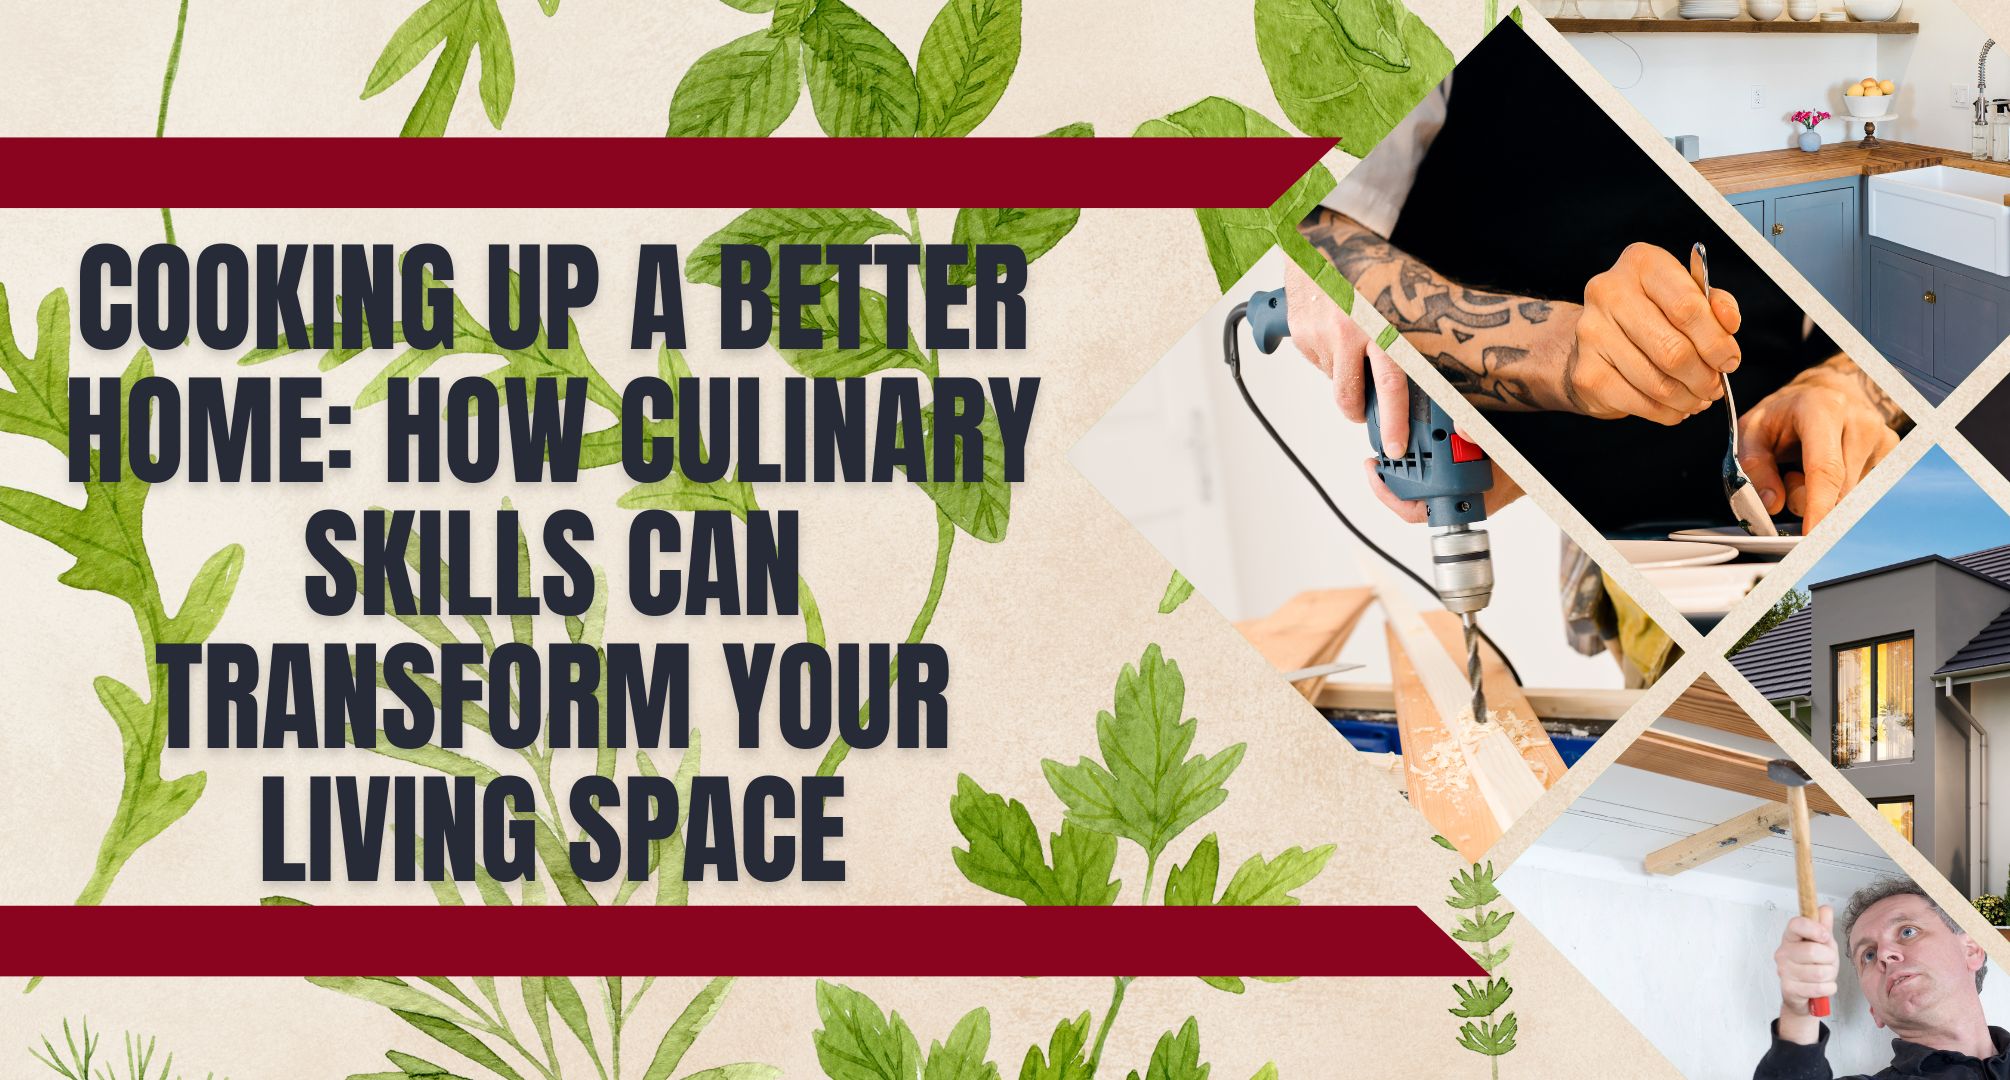 Cooking Up a Better Home How Culinary Skills Can Transform Your Living Space